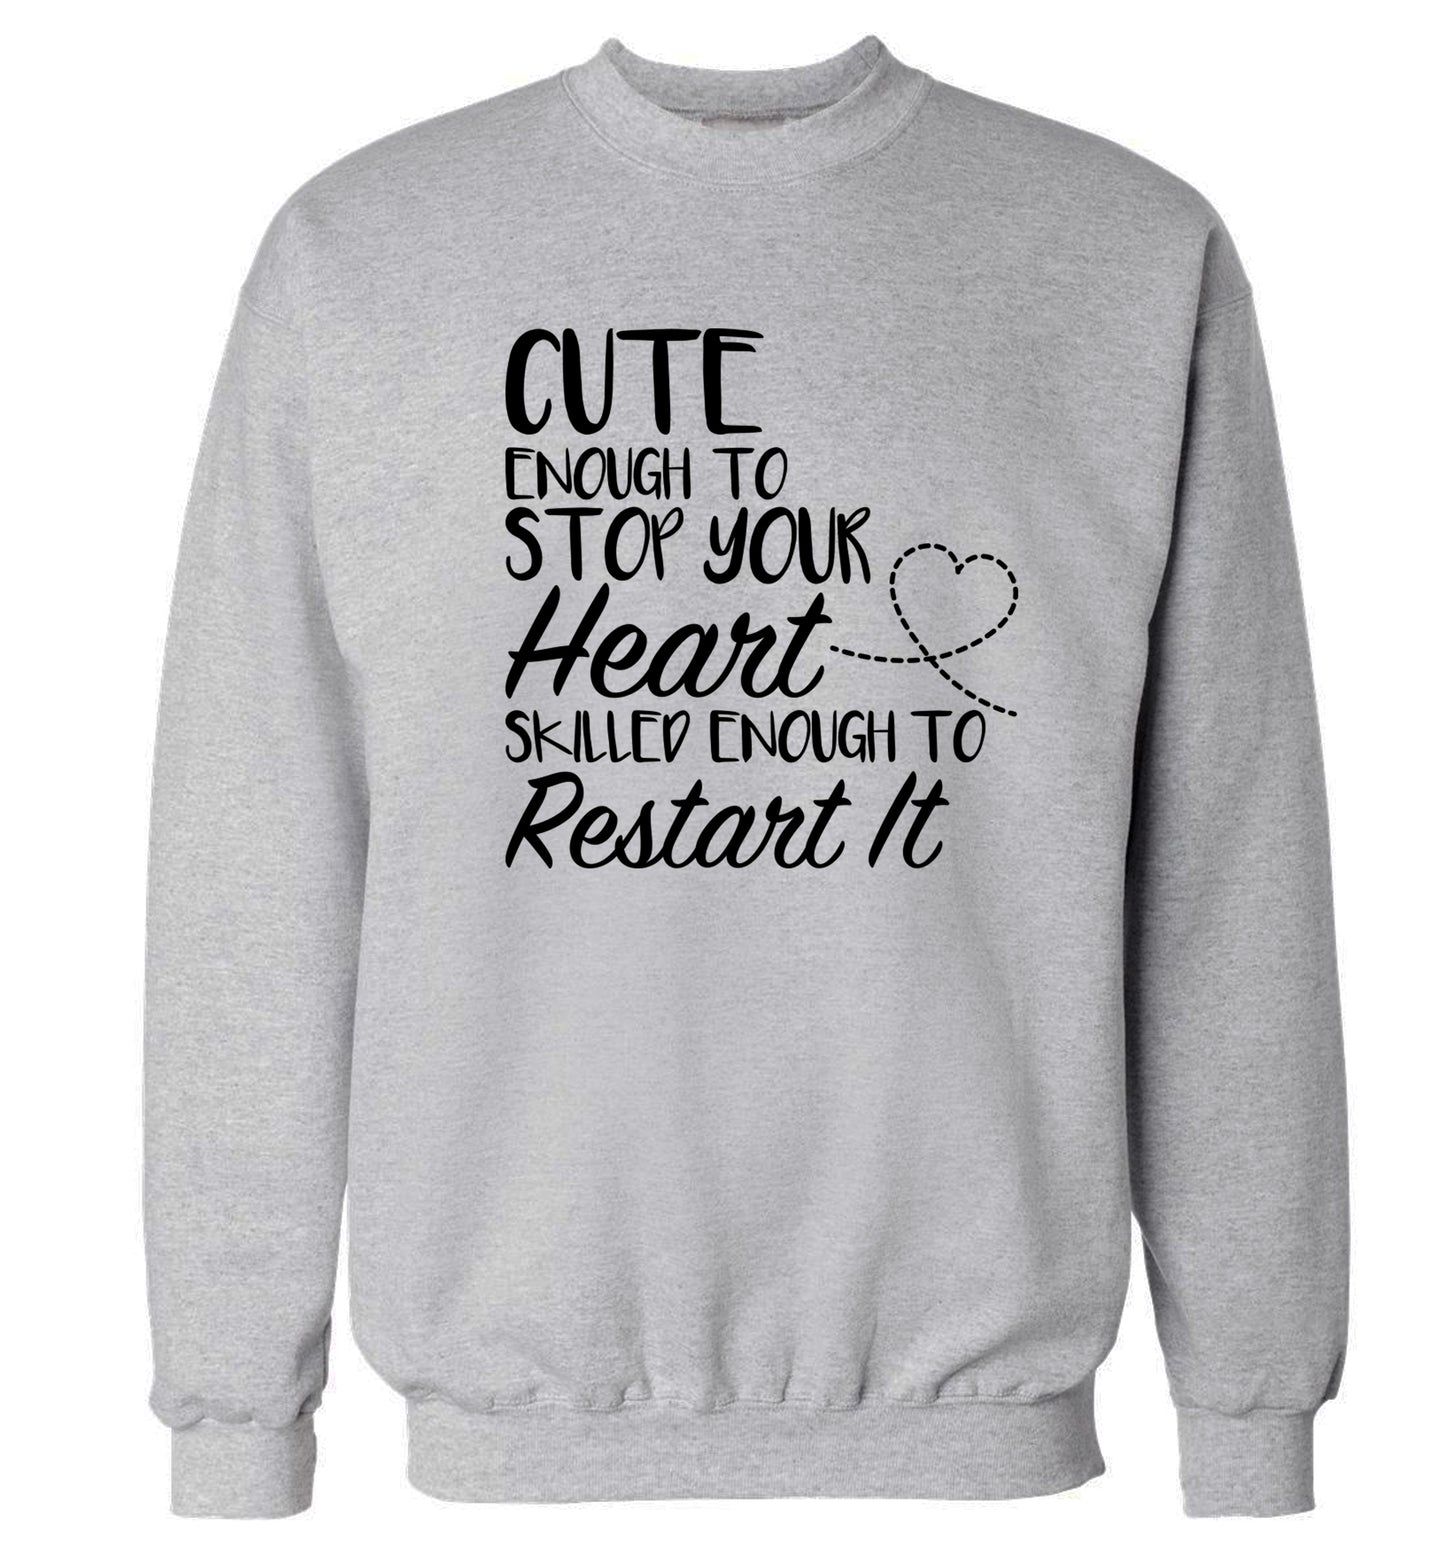 Cute enough to stop your heart skilled enough to restart it Adult's unisex grey Sweater 2XL